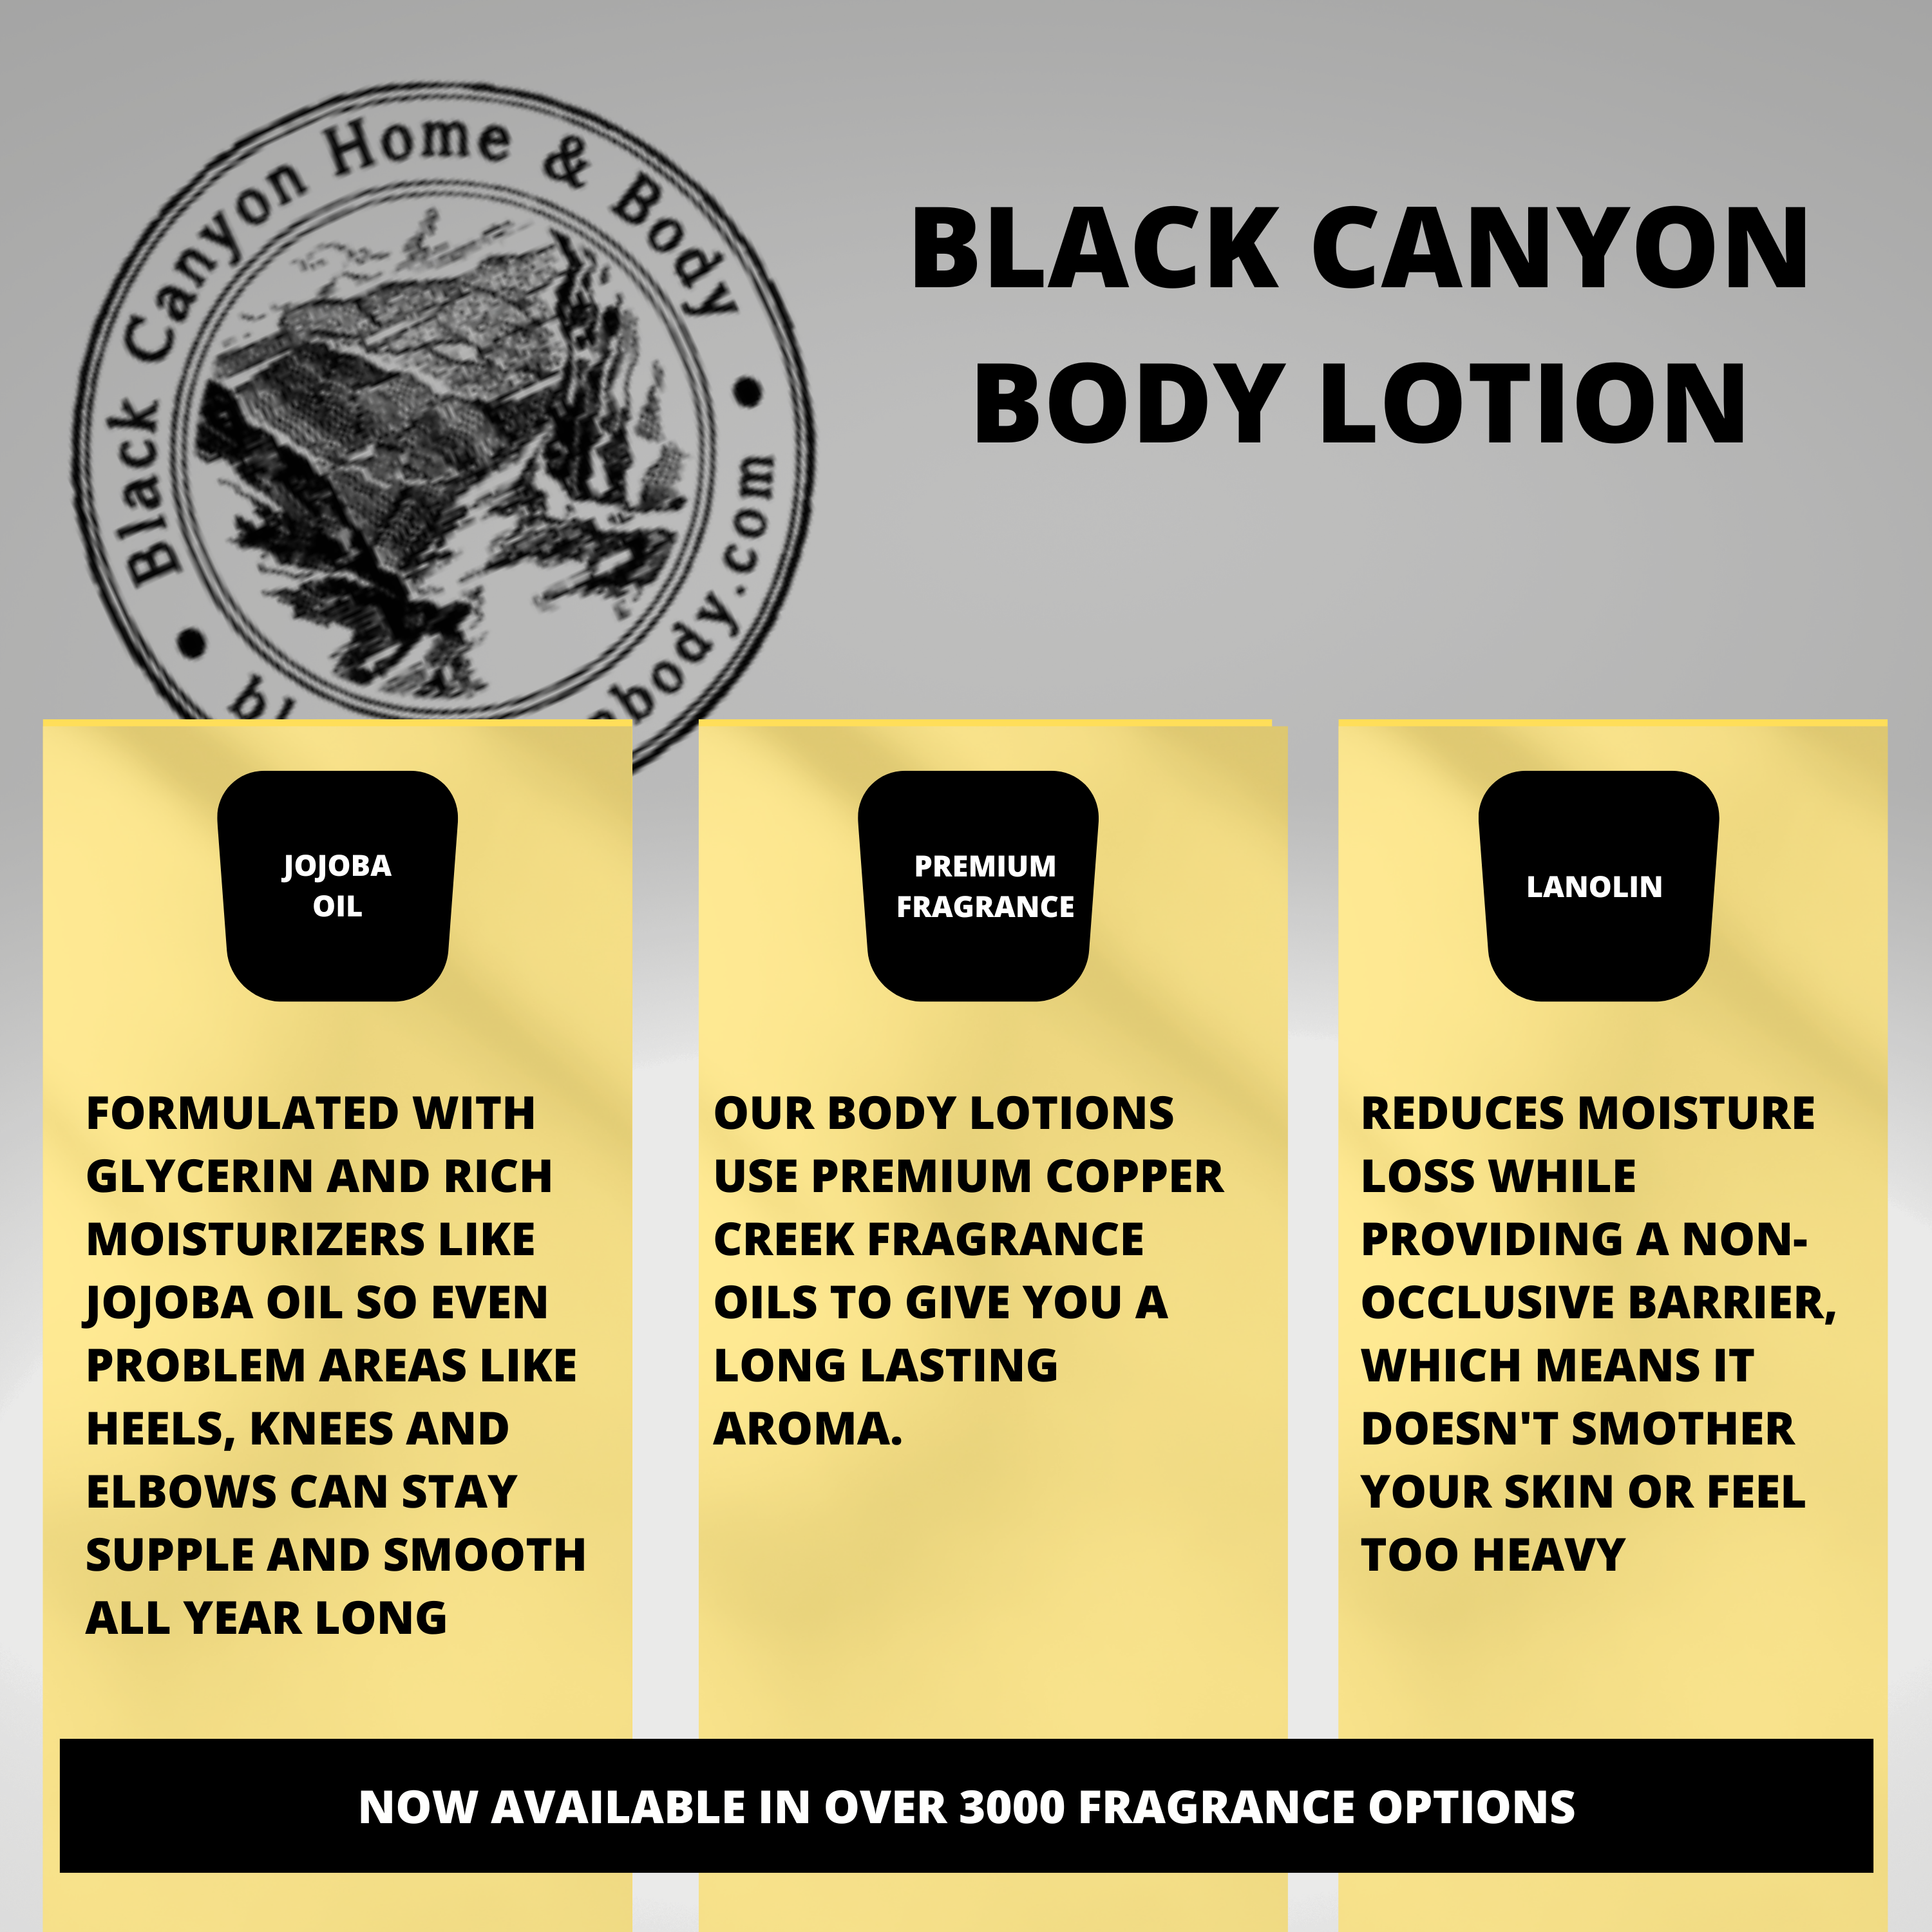 Black Canyon English Toffee Scented Luxury Body Lotion with Lanolin and Jojoba Oil